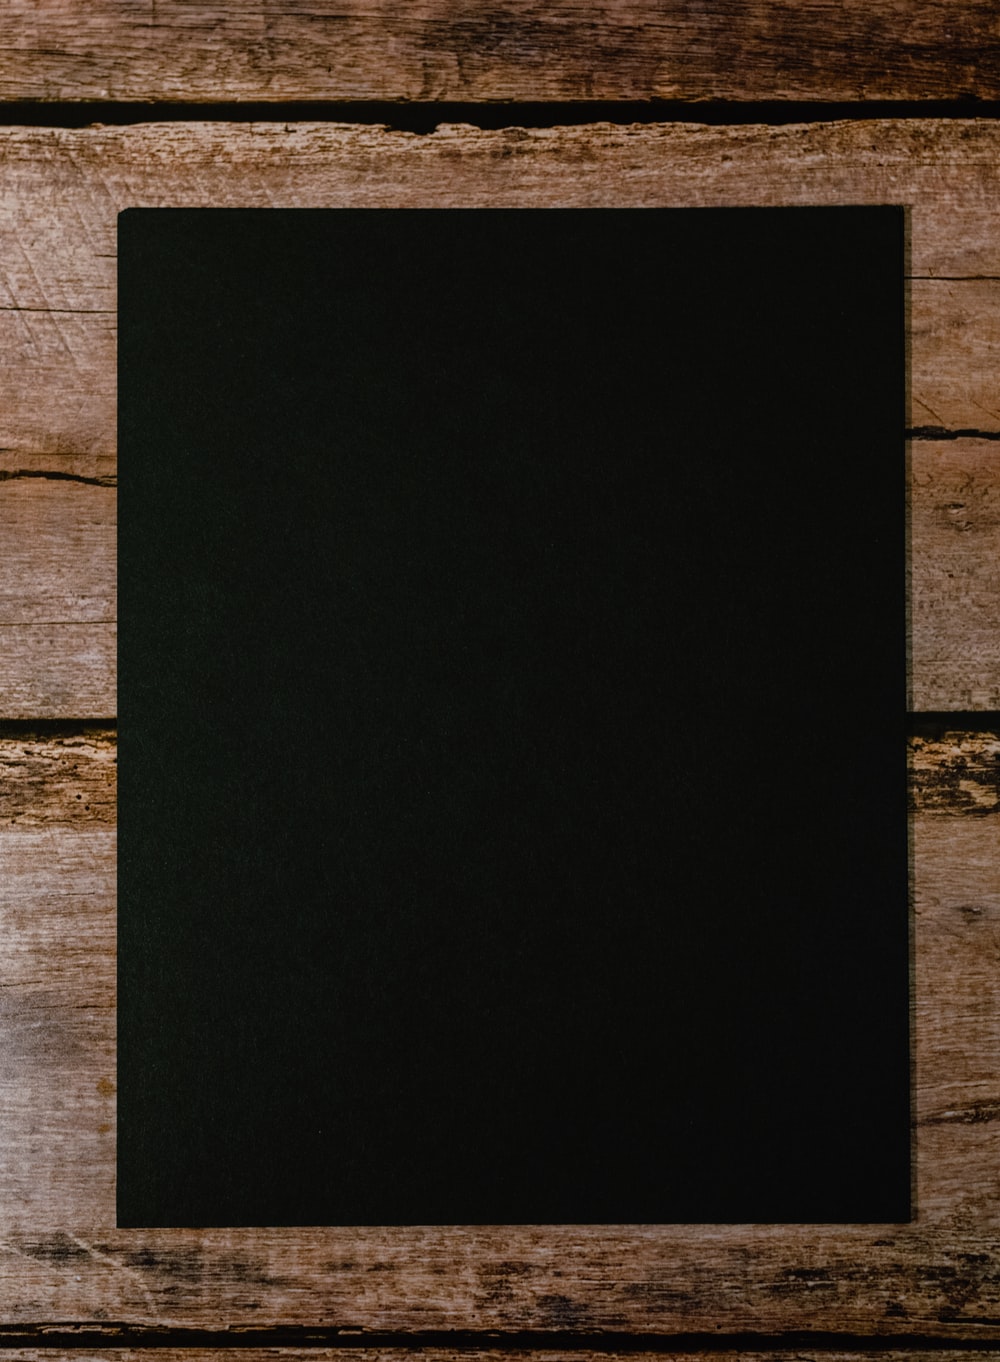 Black Paper Picture. Download Free Image